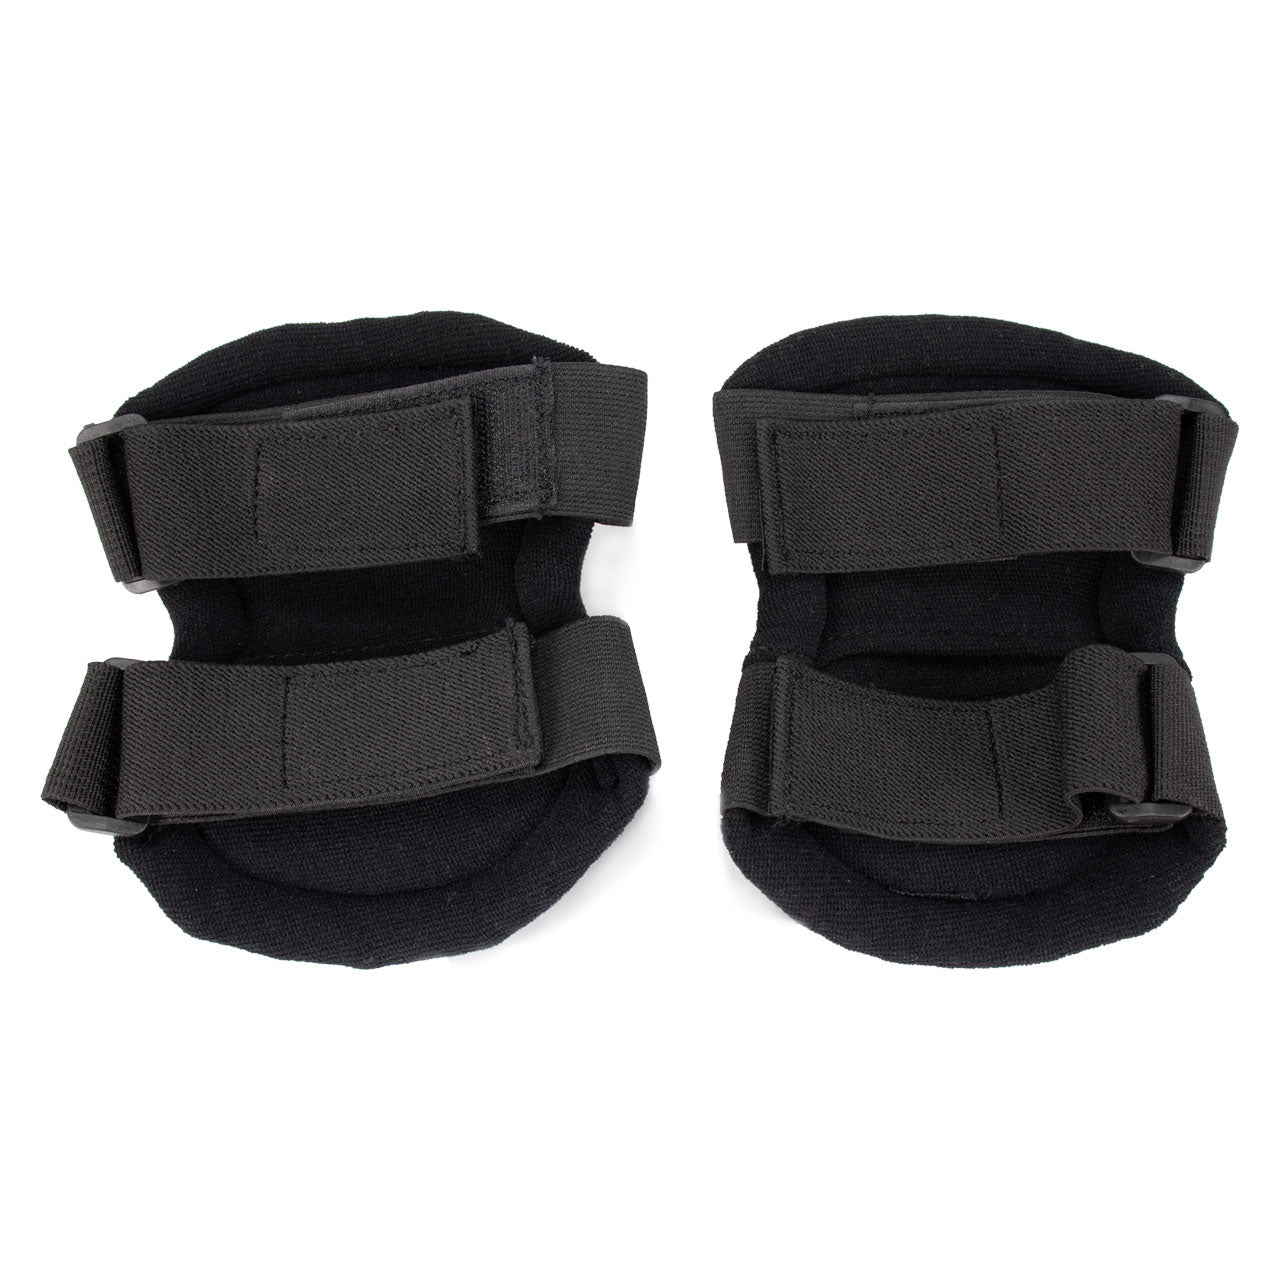 Emerson Airsoft Tactical Elbow Pads